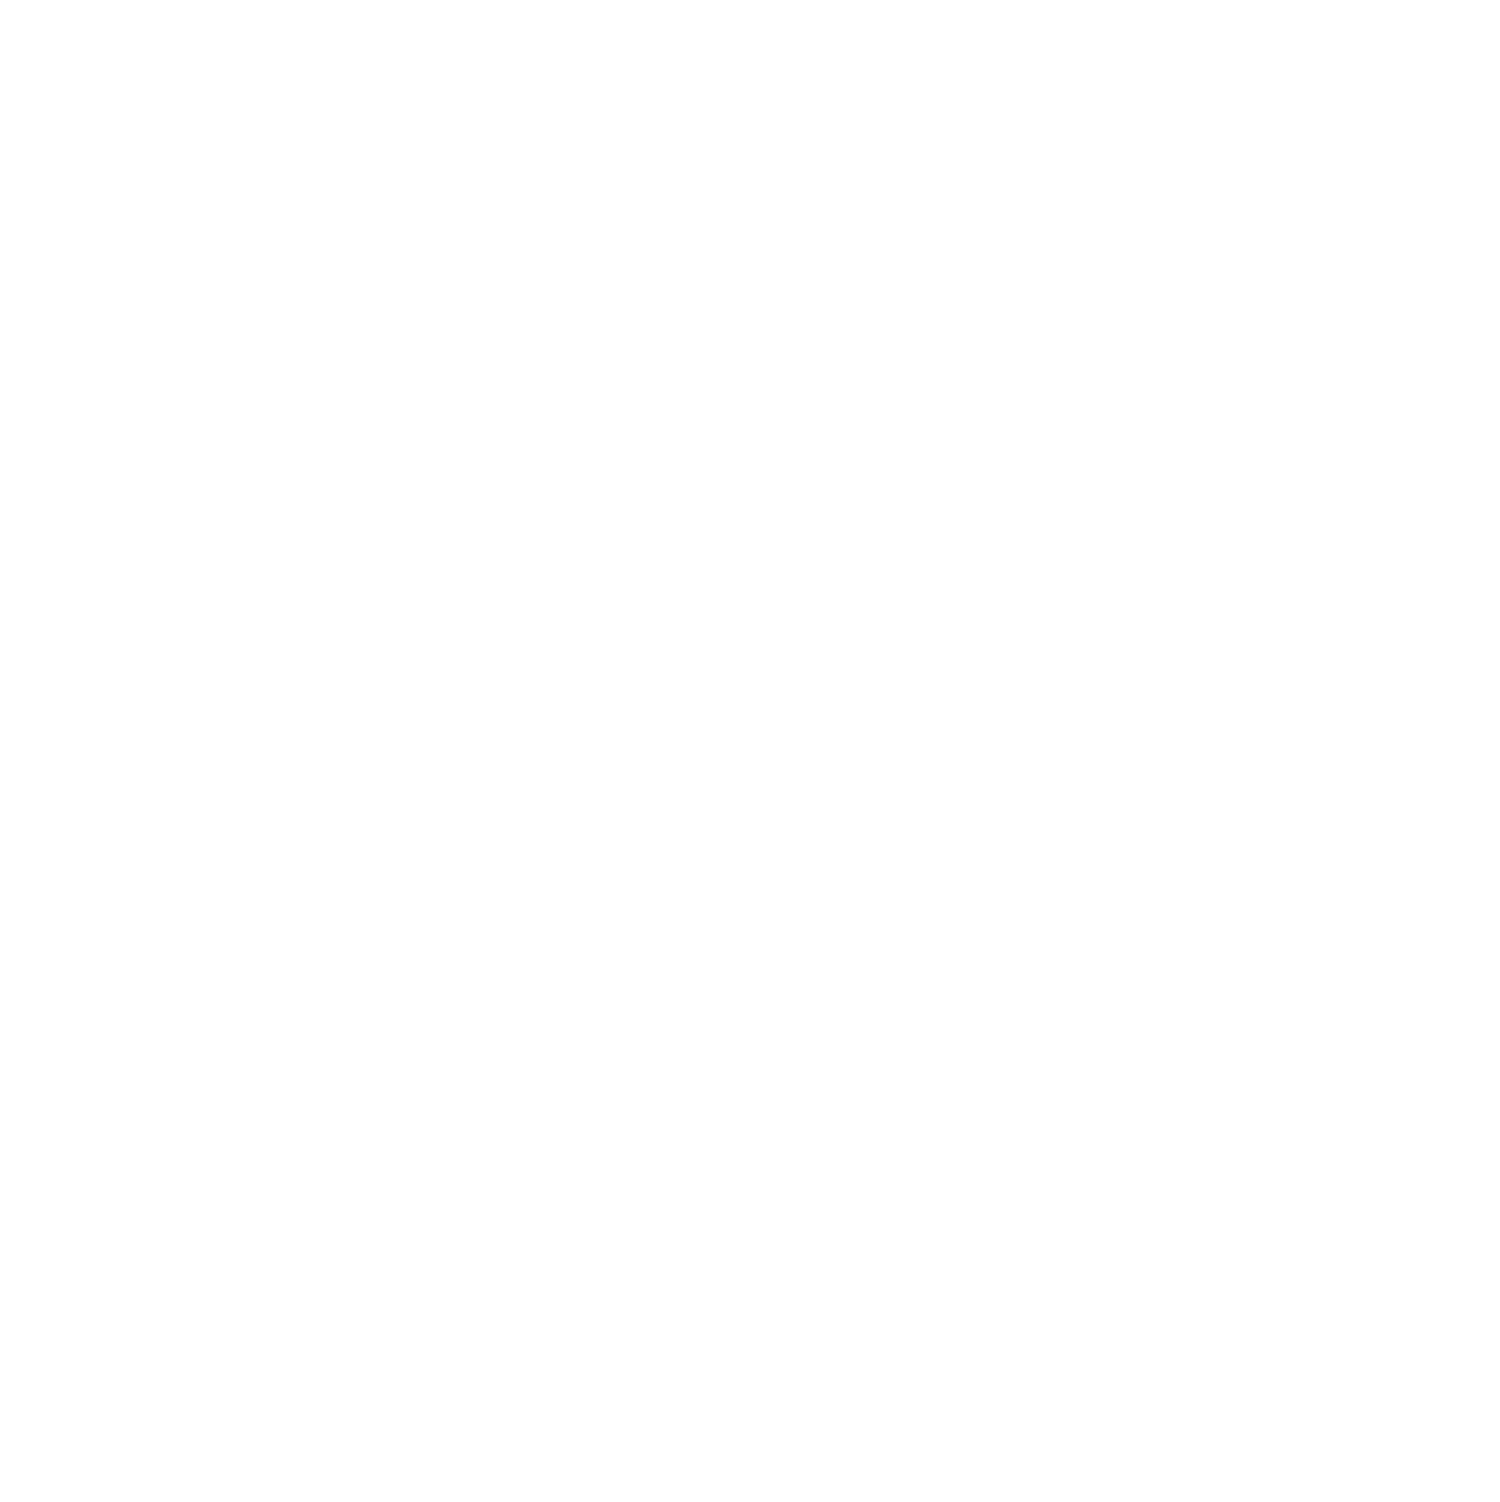 Texas District Youth Ministries